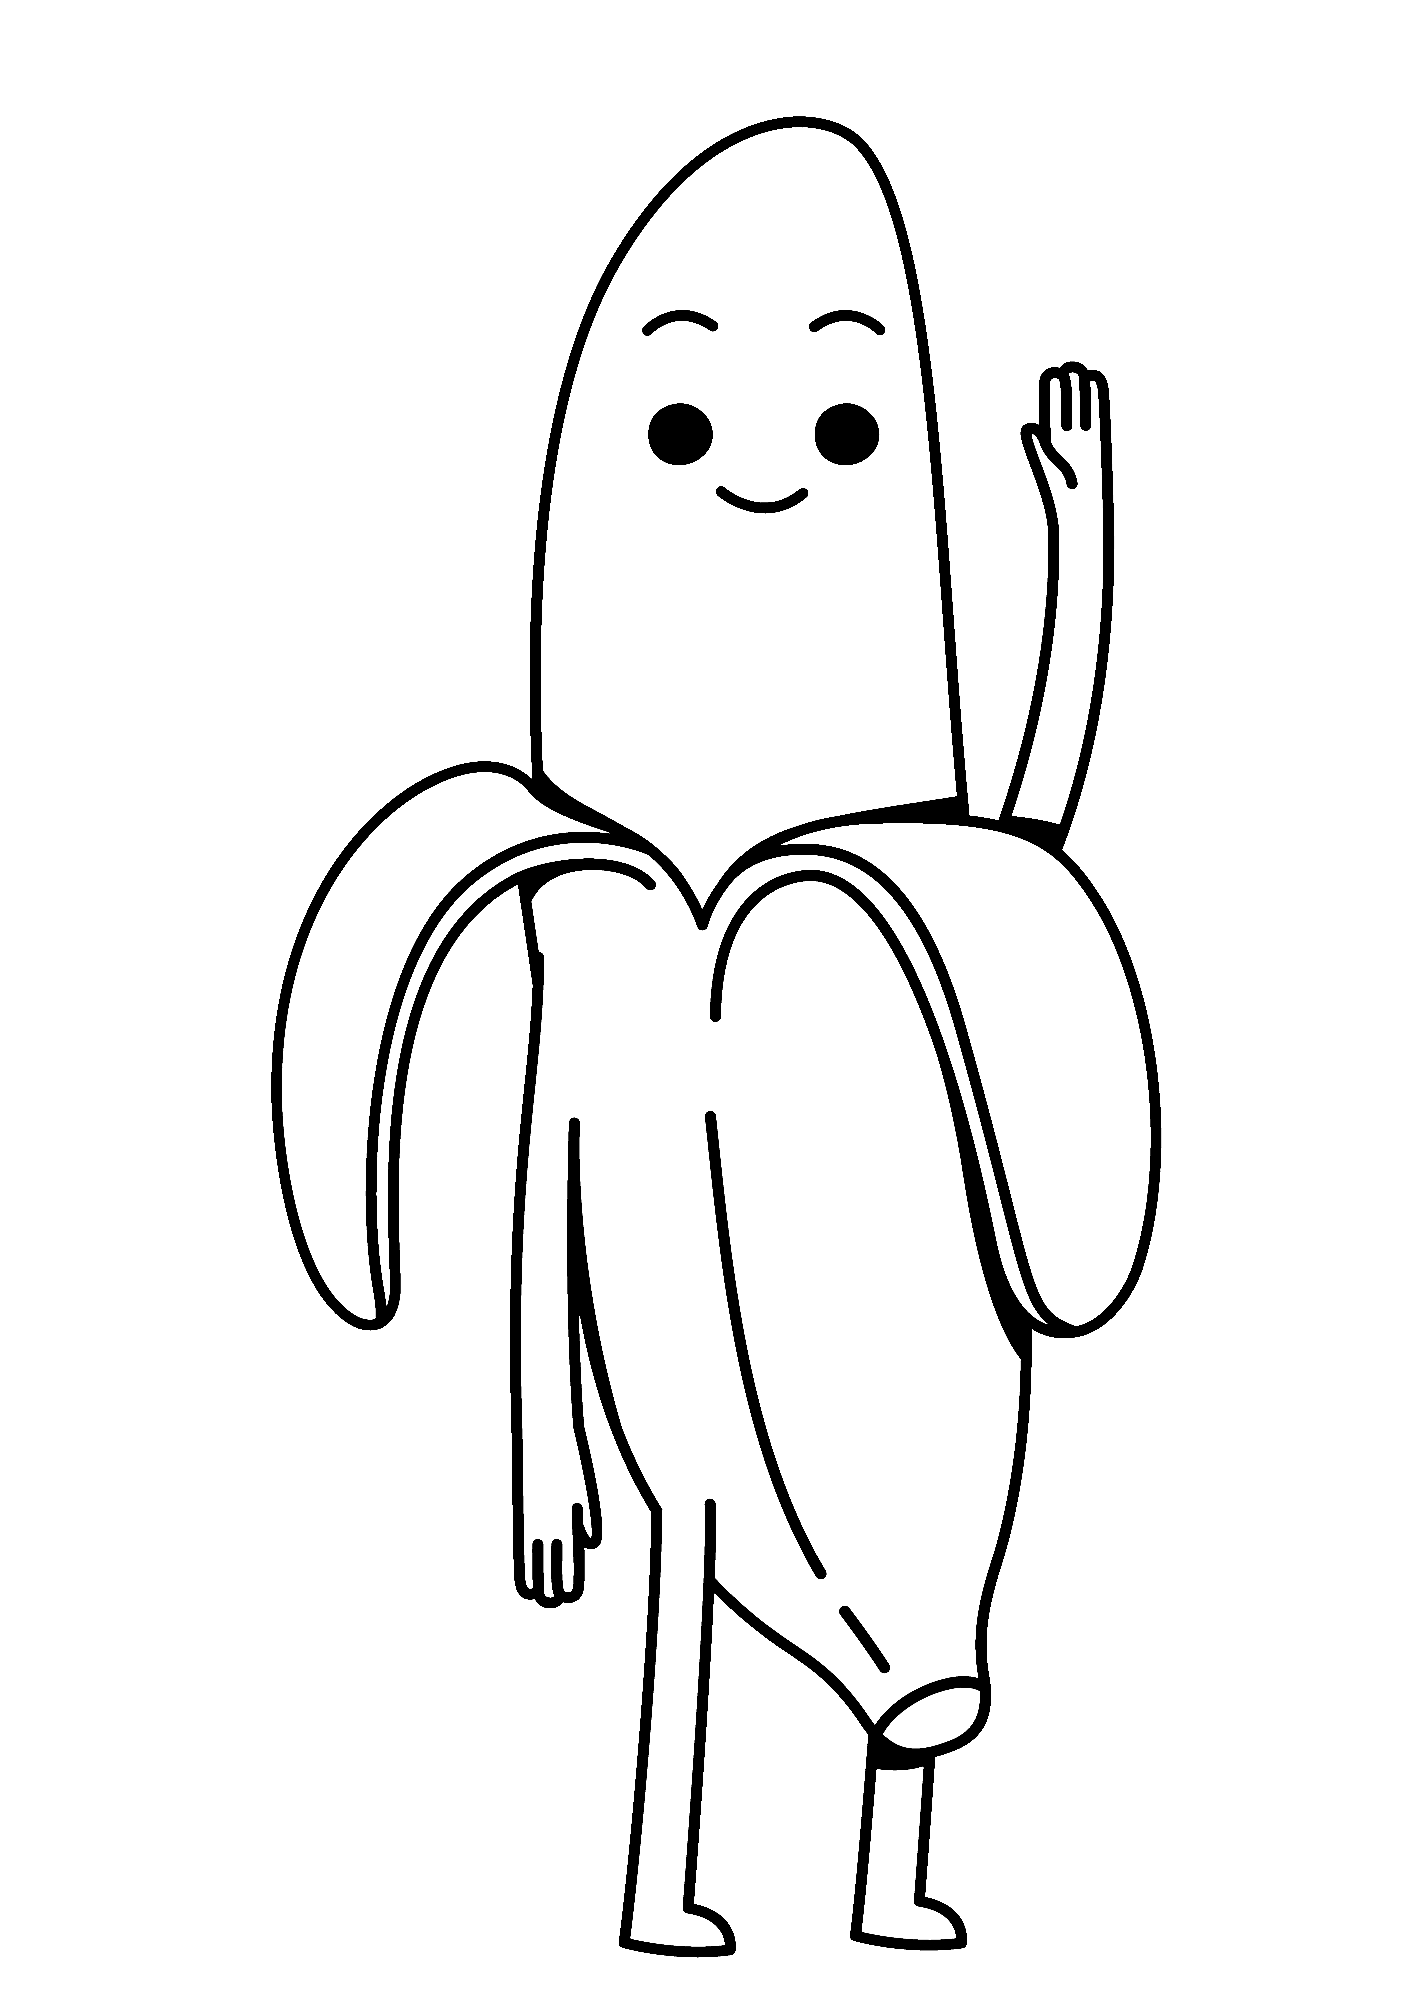 Lovely Banana Coloring Pages